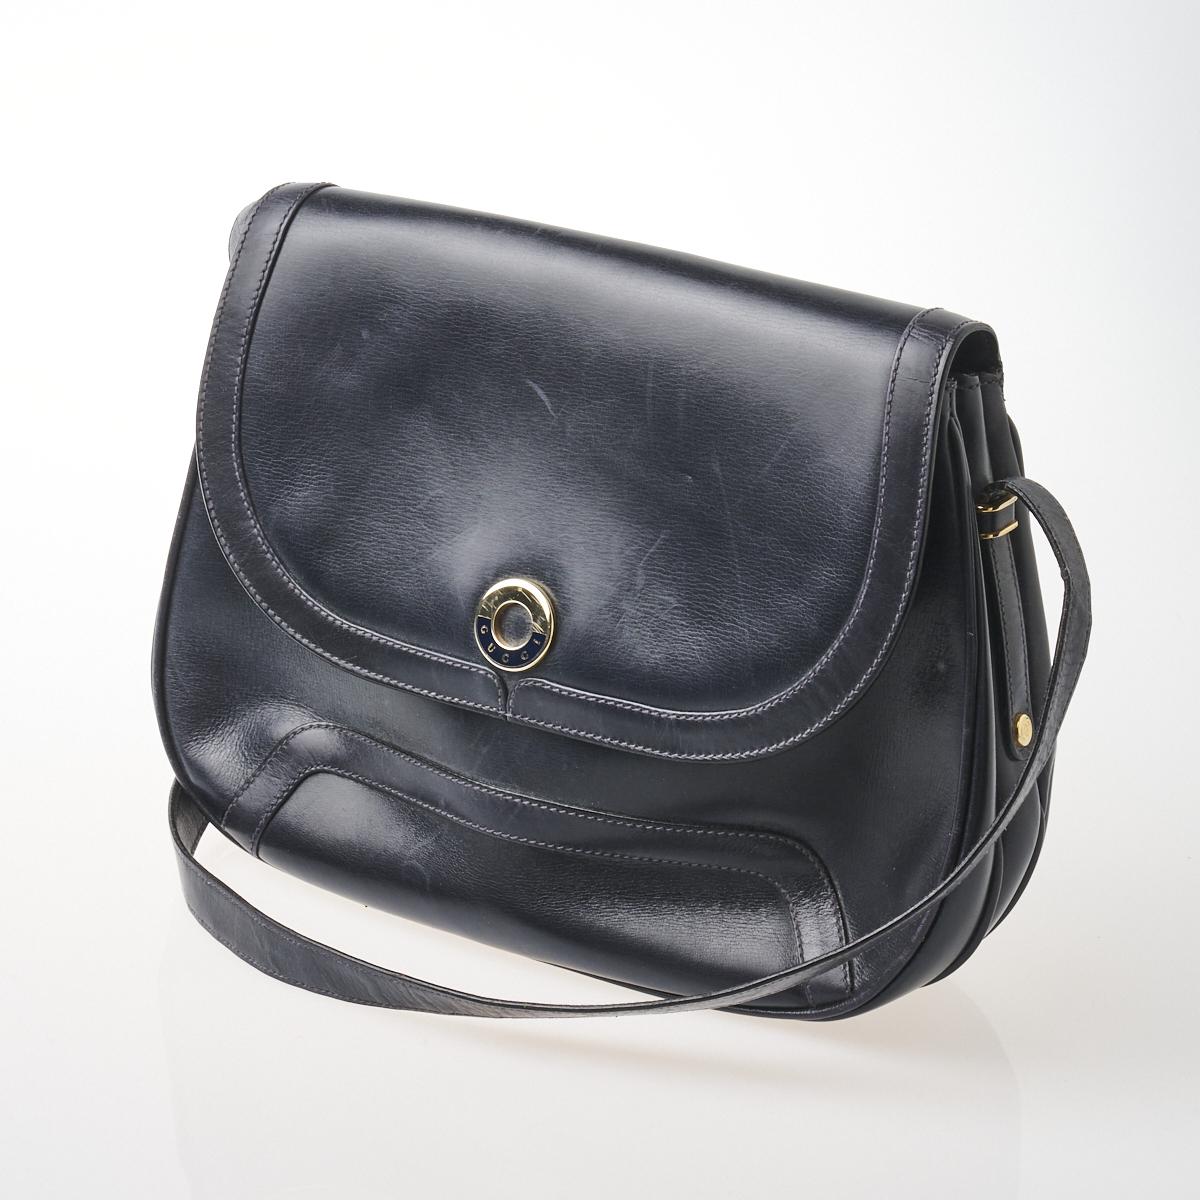 Sold at Auction: Gucci Vintage Black Leather Purse